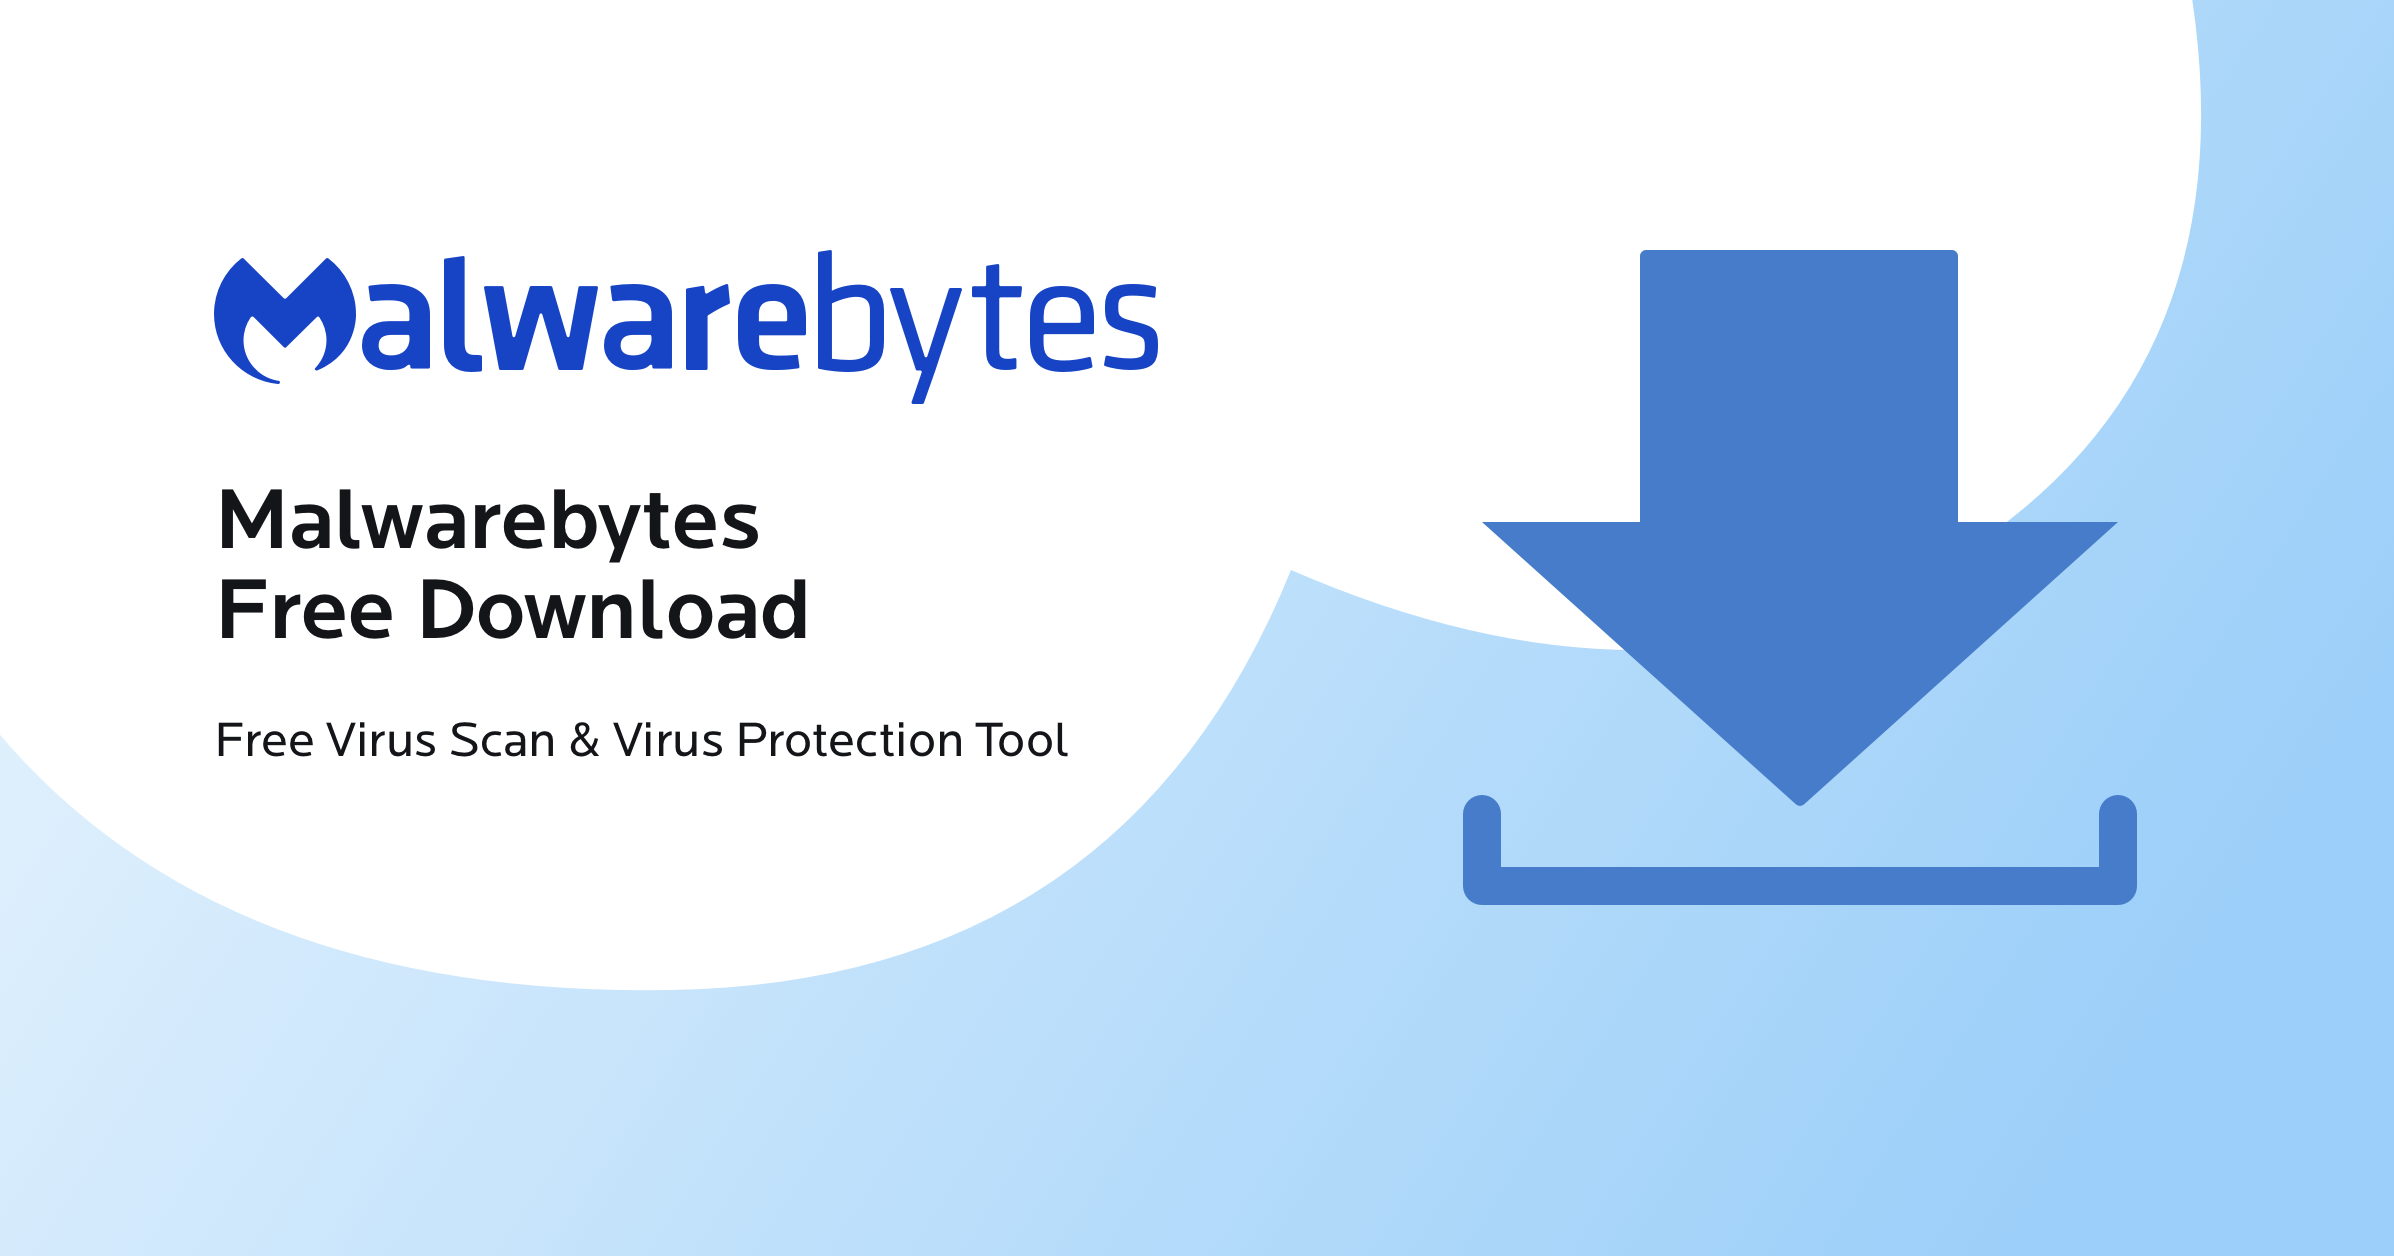 Download and install a reputable anti-malware program such as Malwarebytes
Run a full system scan